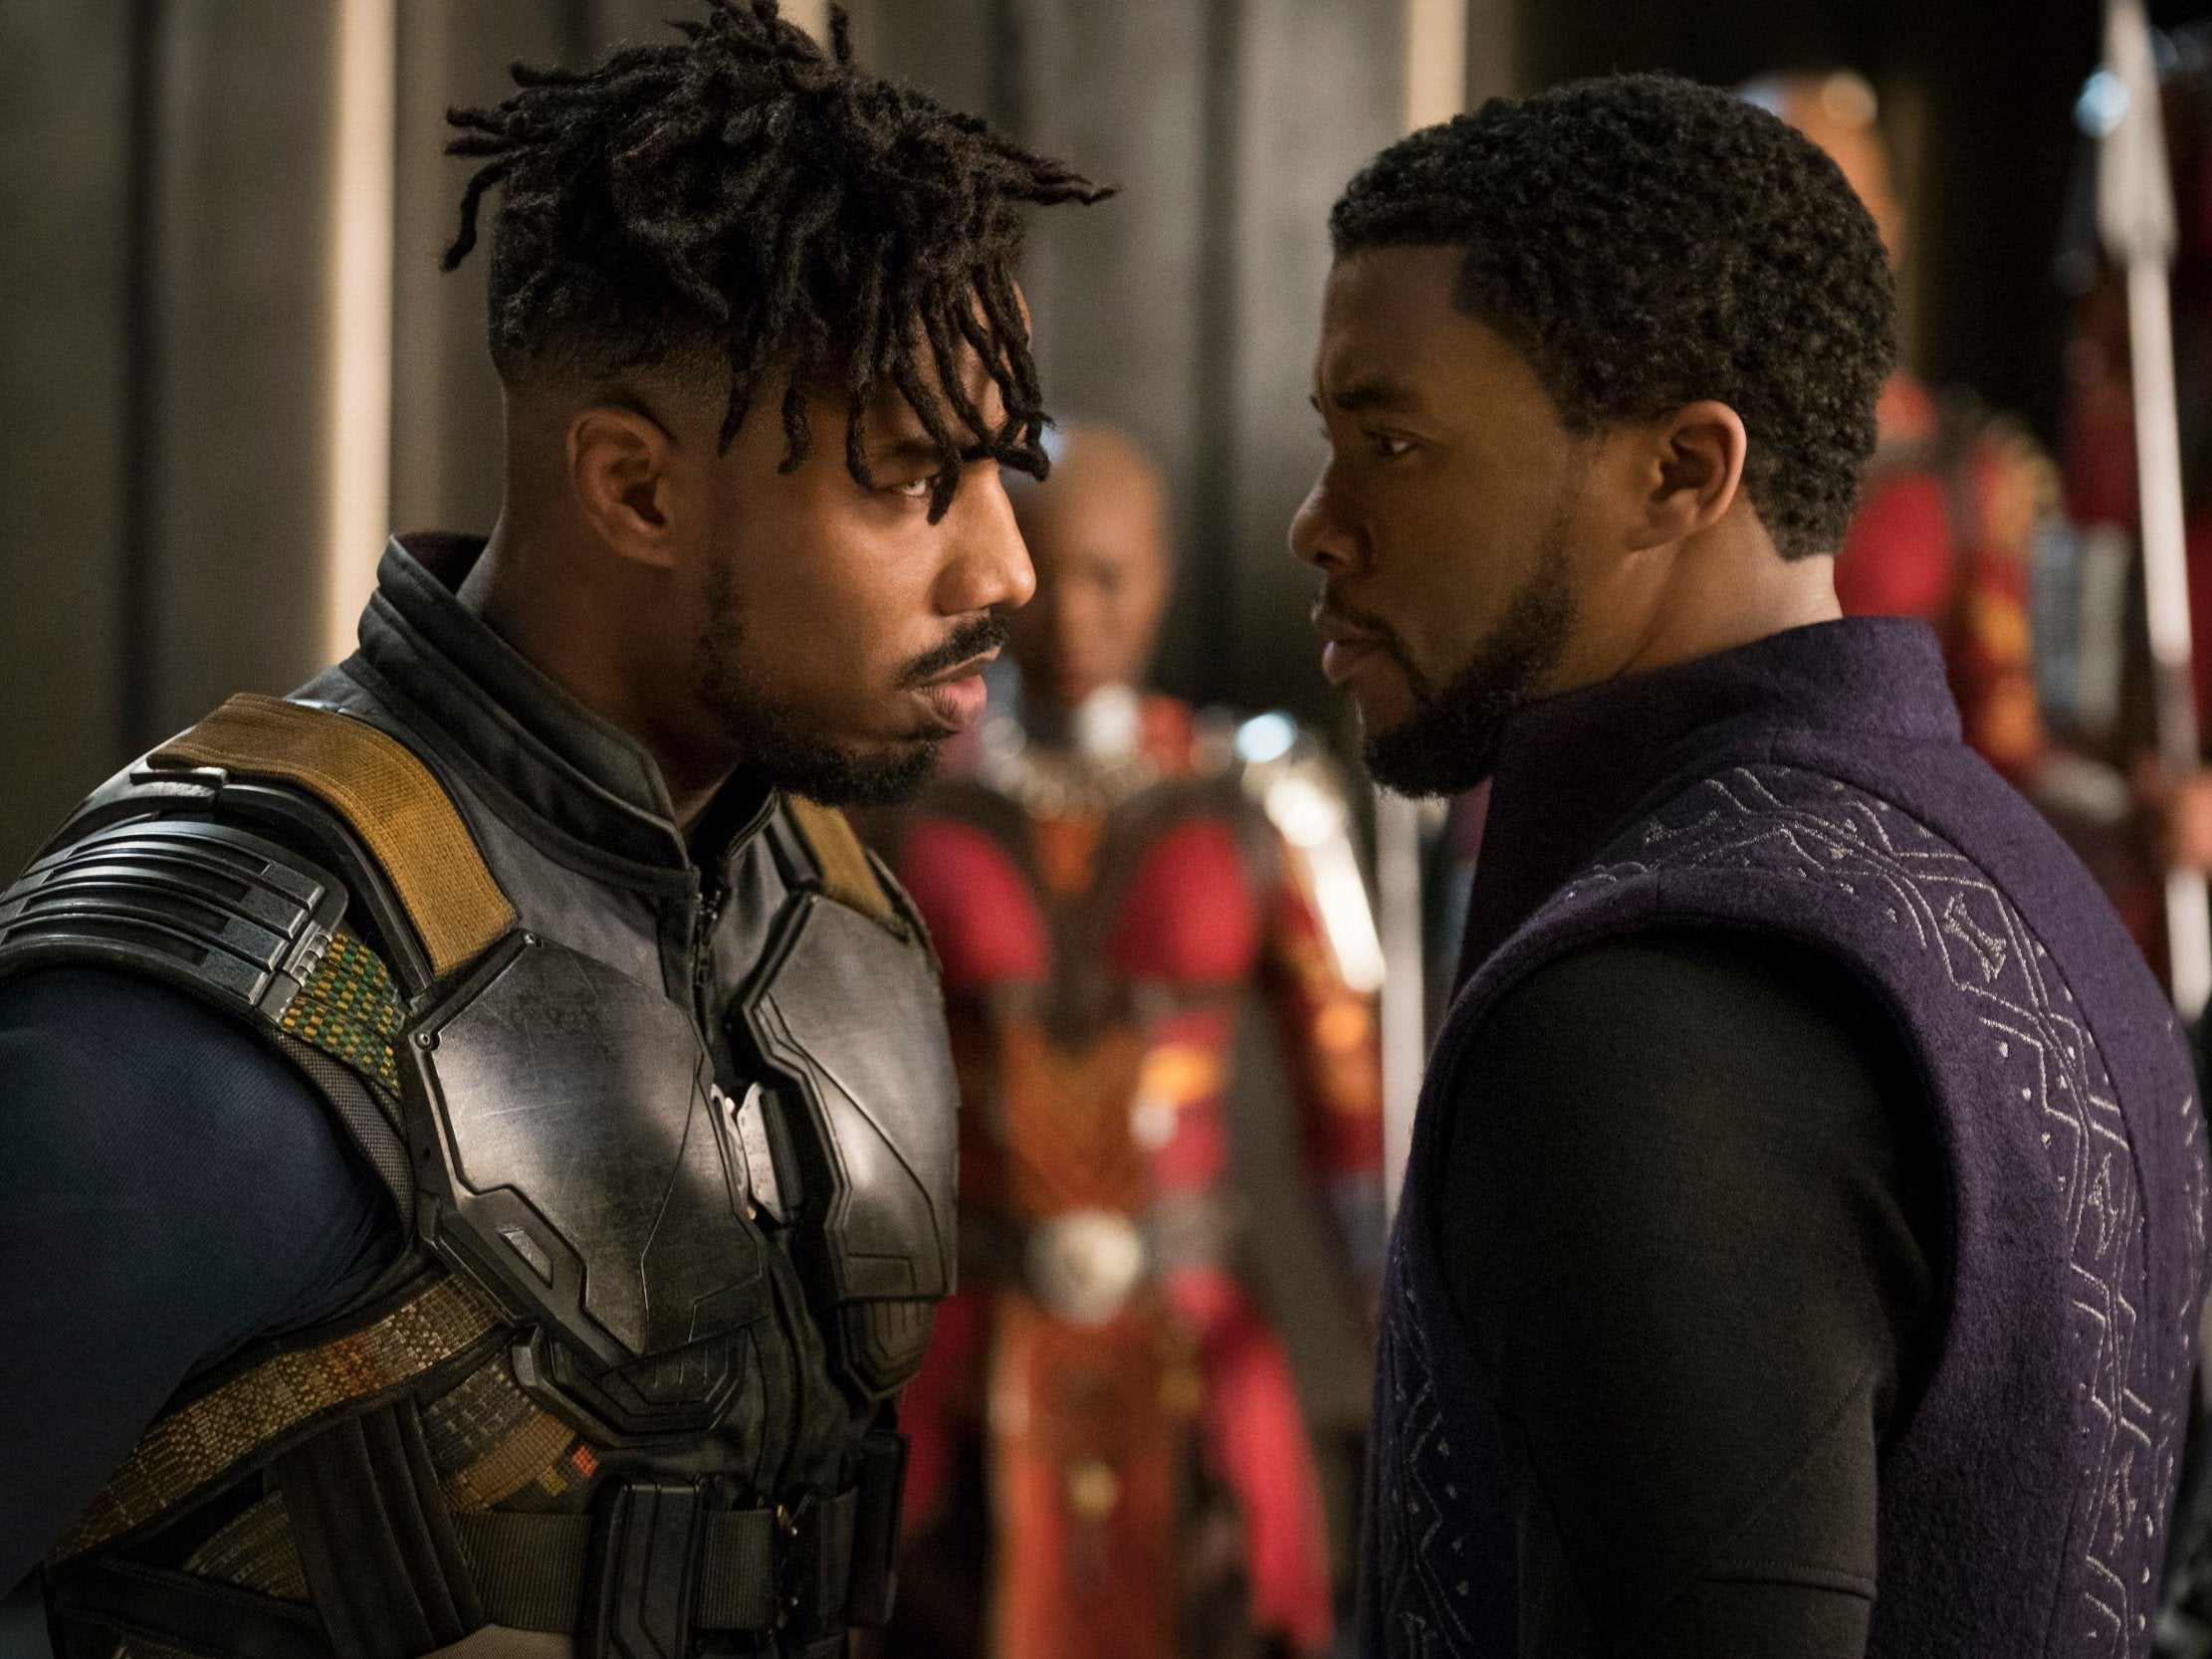 Michael B Jordan (left) and Chadwick Boseman in a scene from ‘Black Panther’